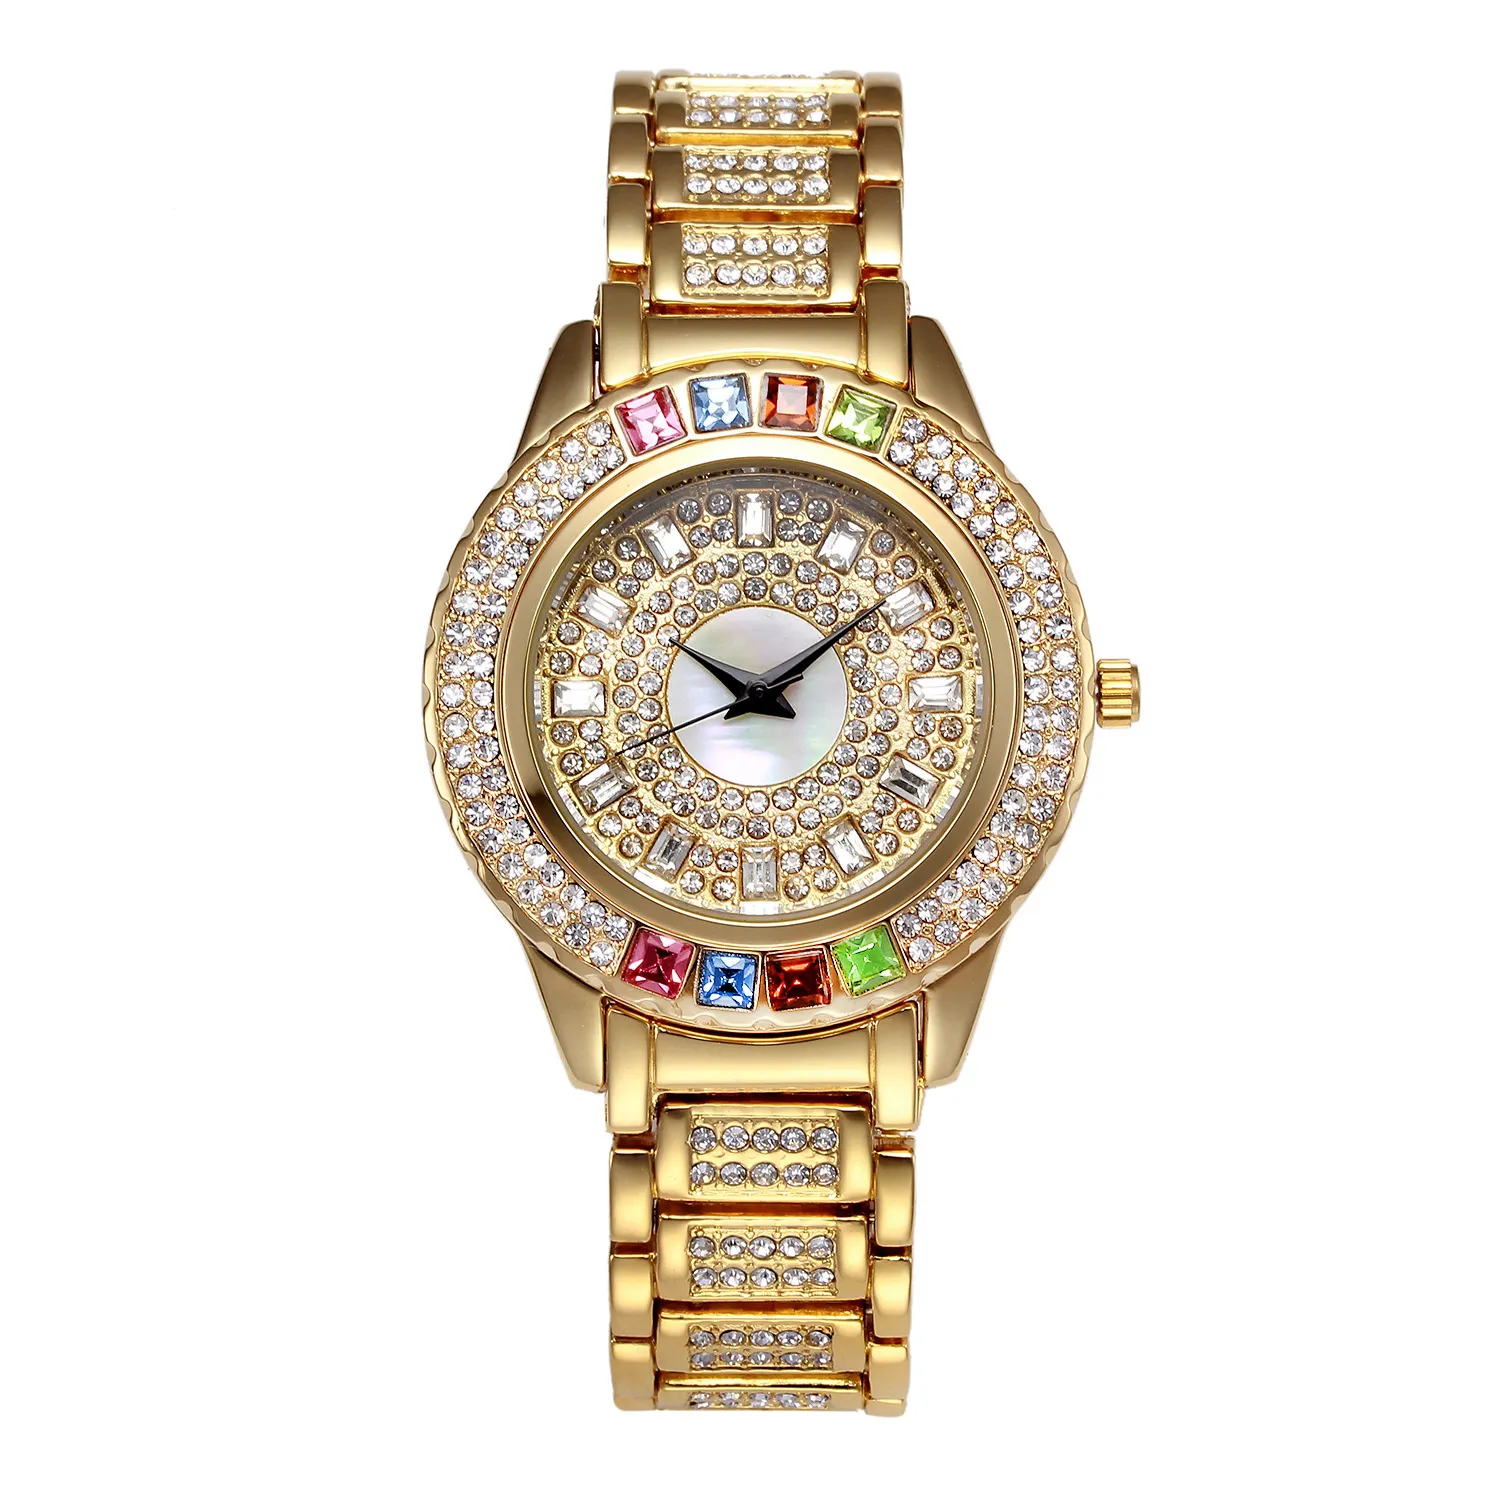 Luxury Watch Women 2020 Fashion Watch With Crystals Diamond Gold And Silver Watch Women